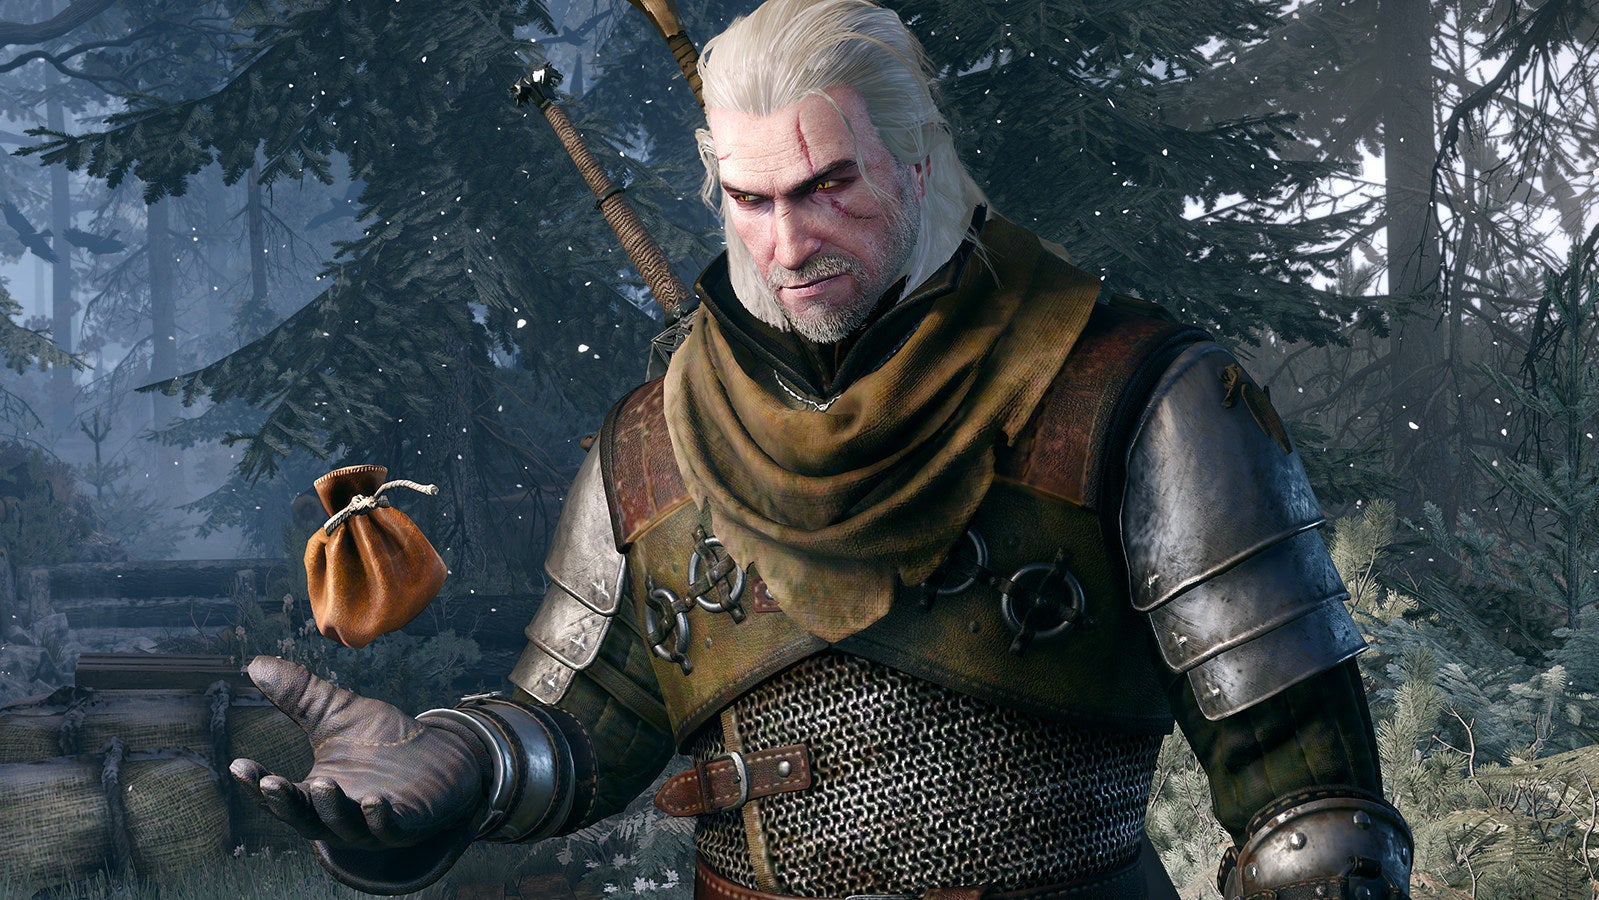 game Geralt tosses a coin purse in a The Witcher 3: Wild Hunt screenshot.